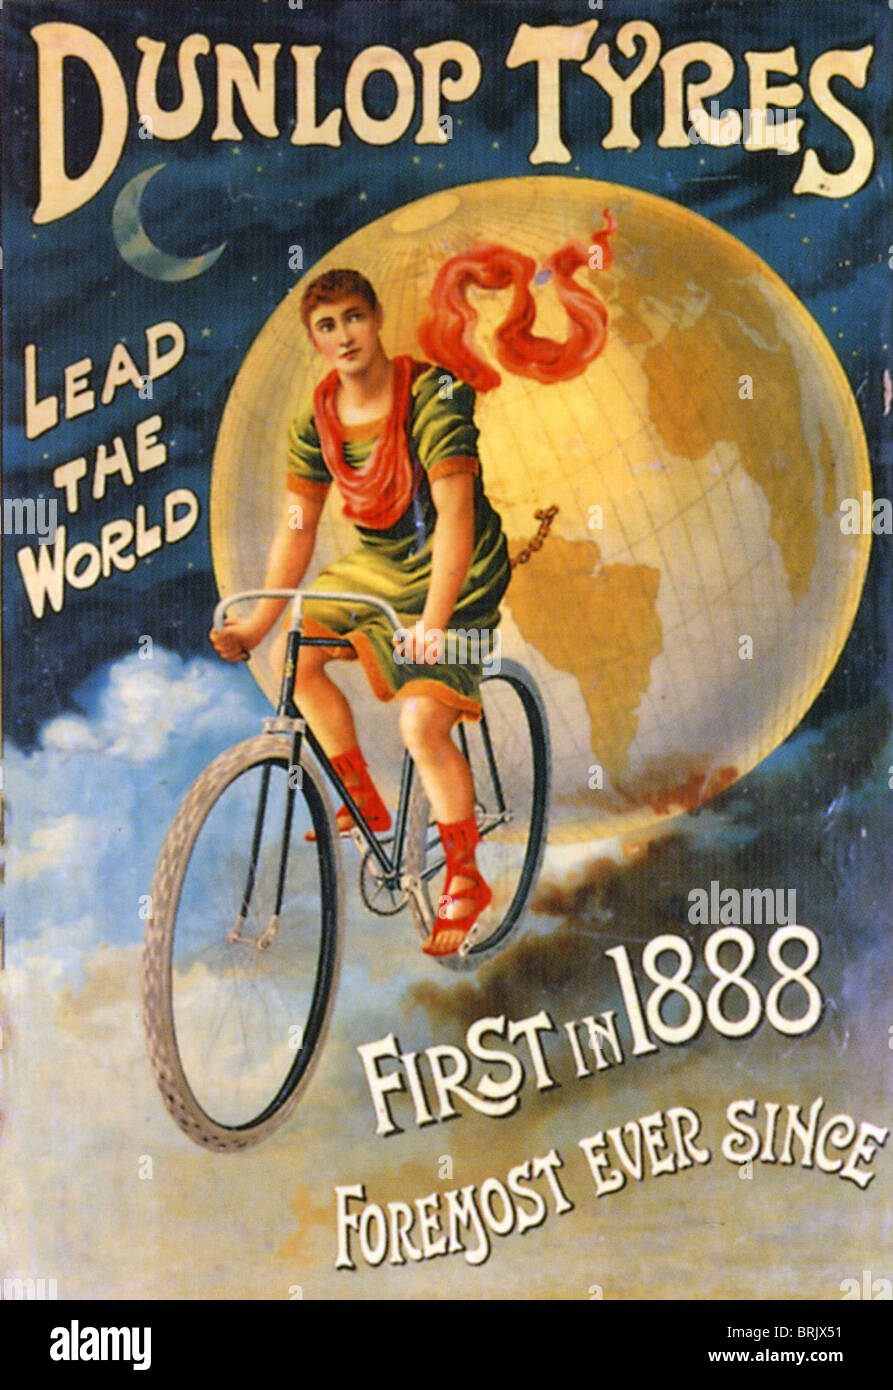 DUNLOP  TYRES  poster about 1900 Stock Photo